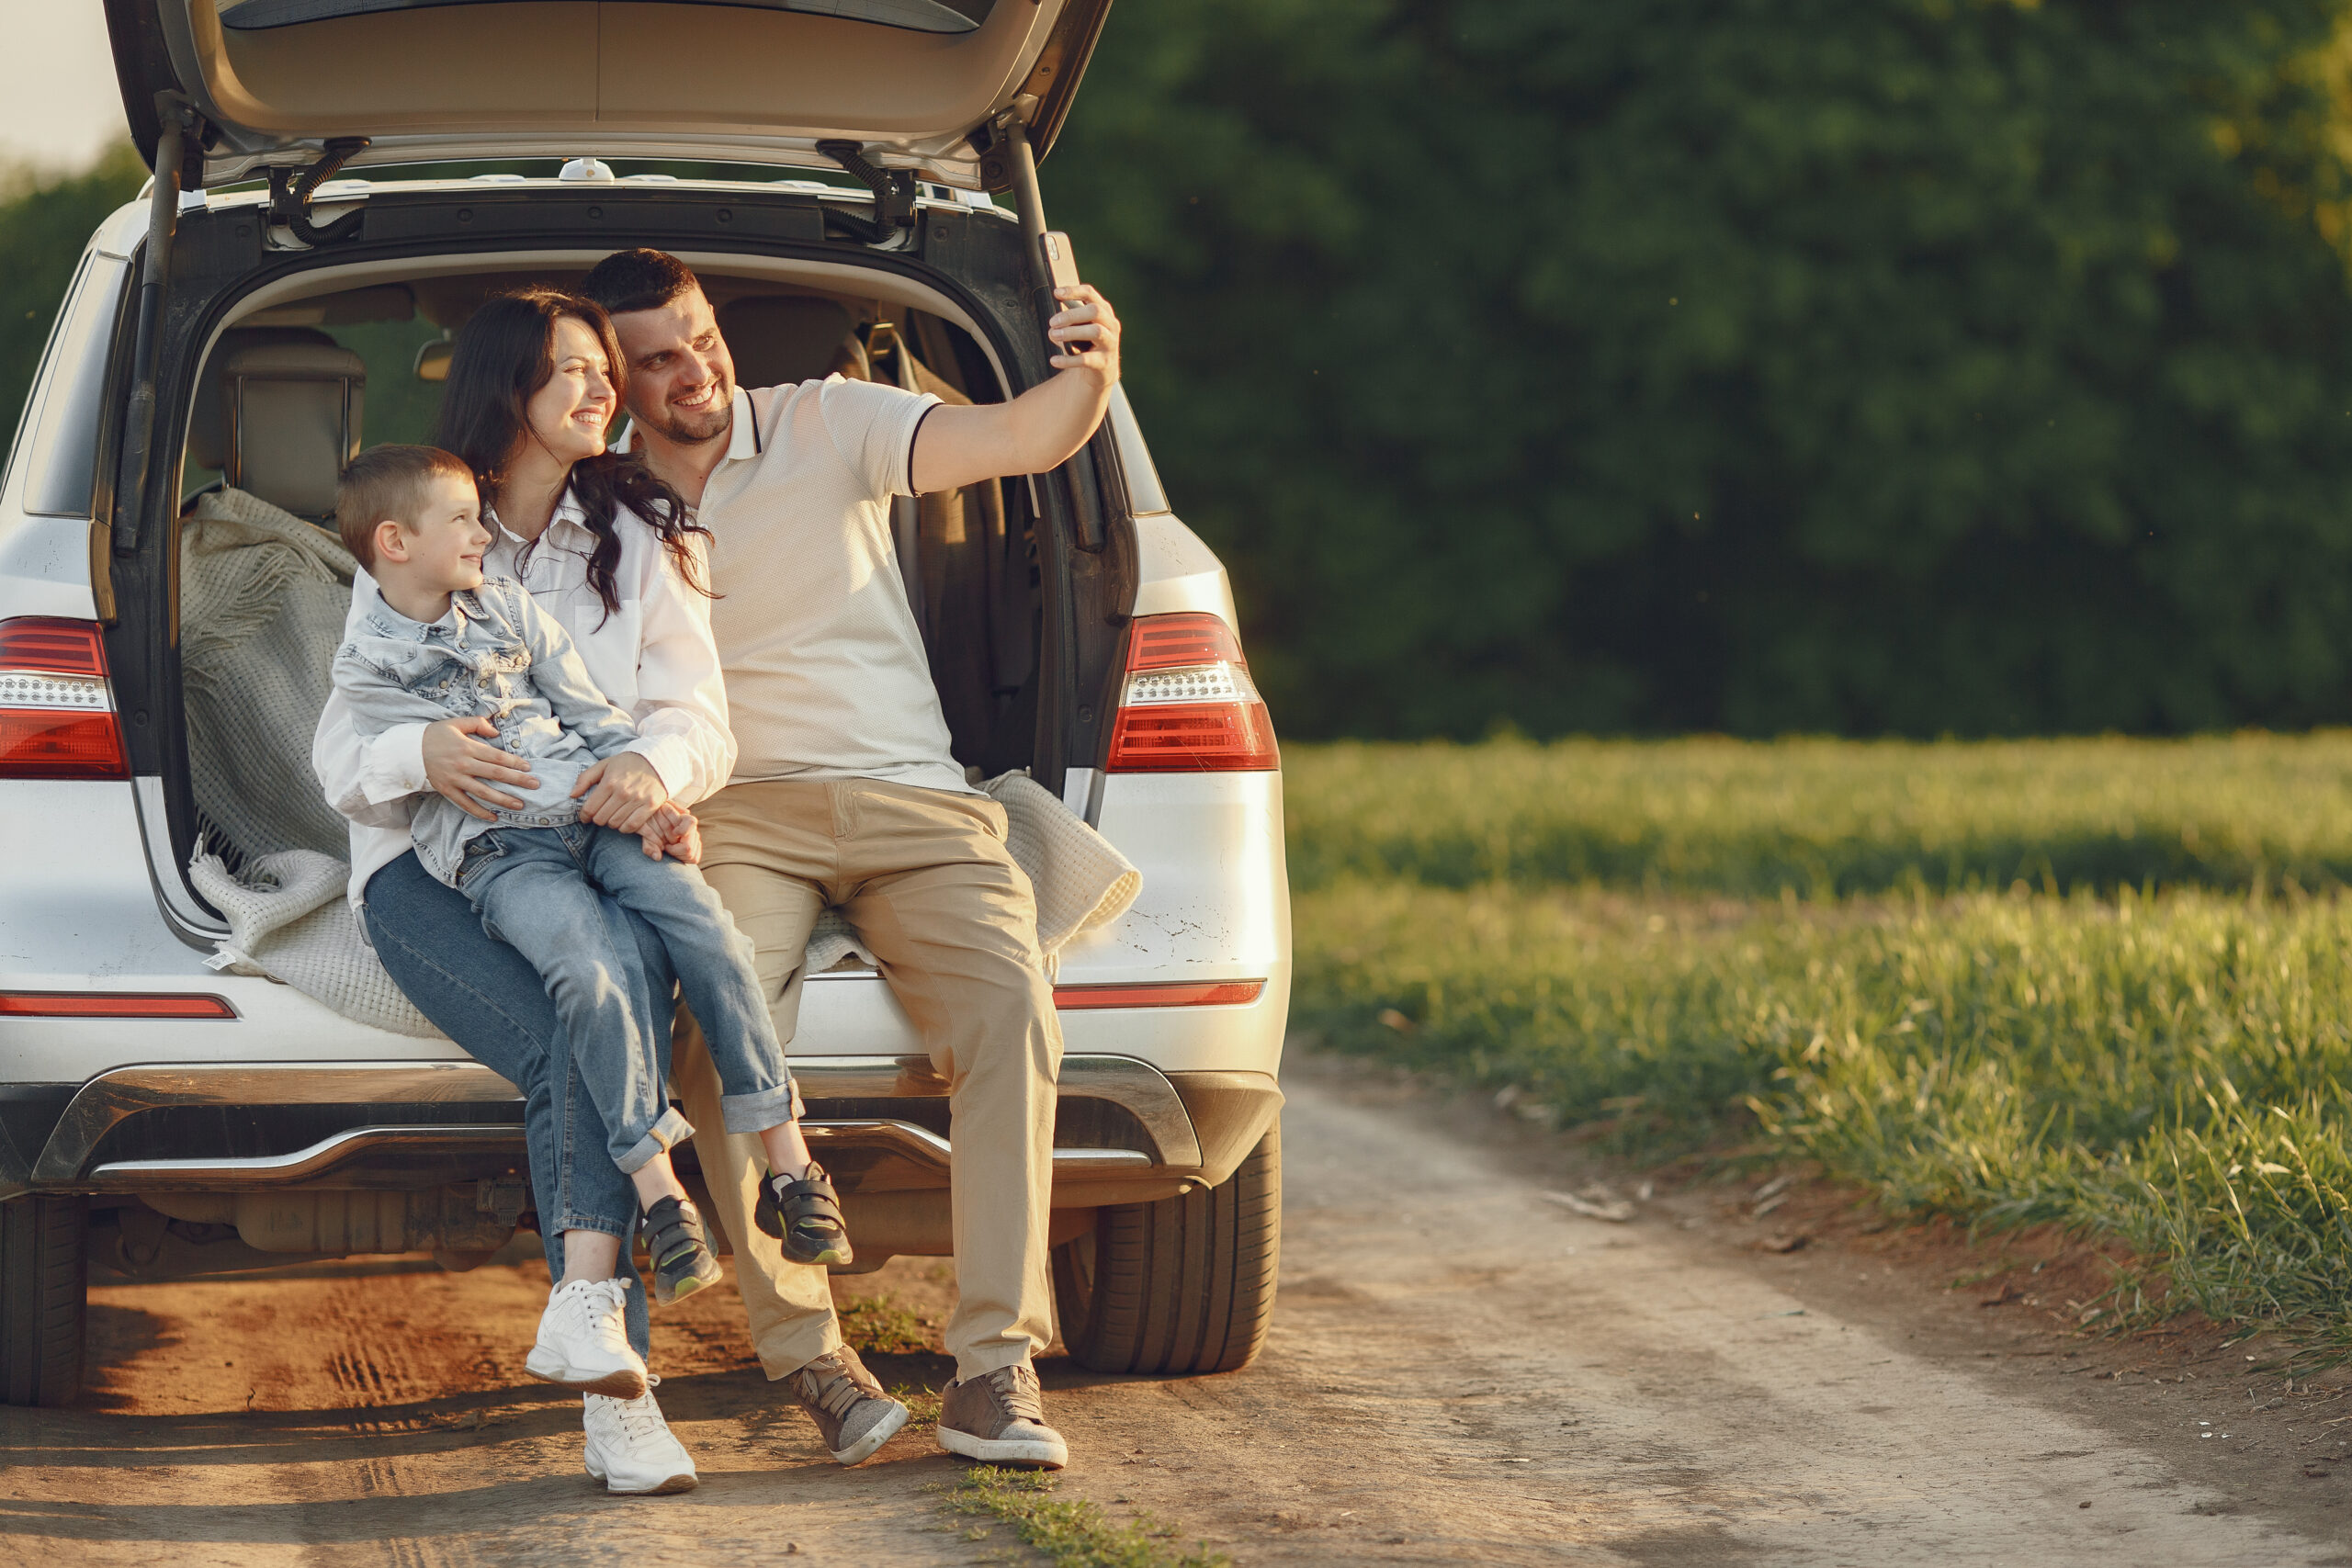 Family in a forest. People by the car. Sunset background.